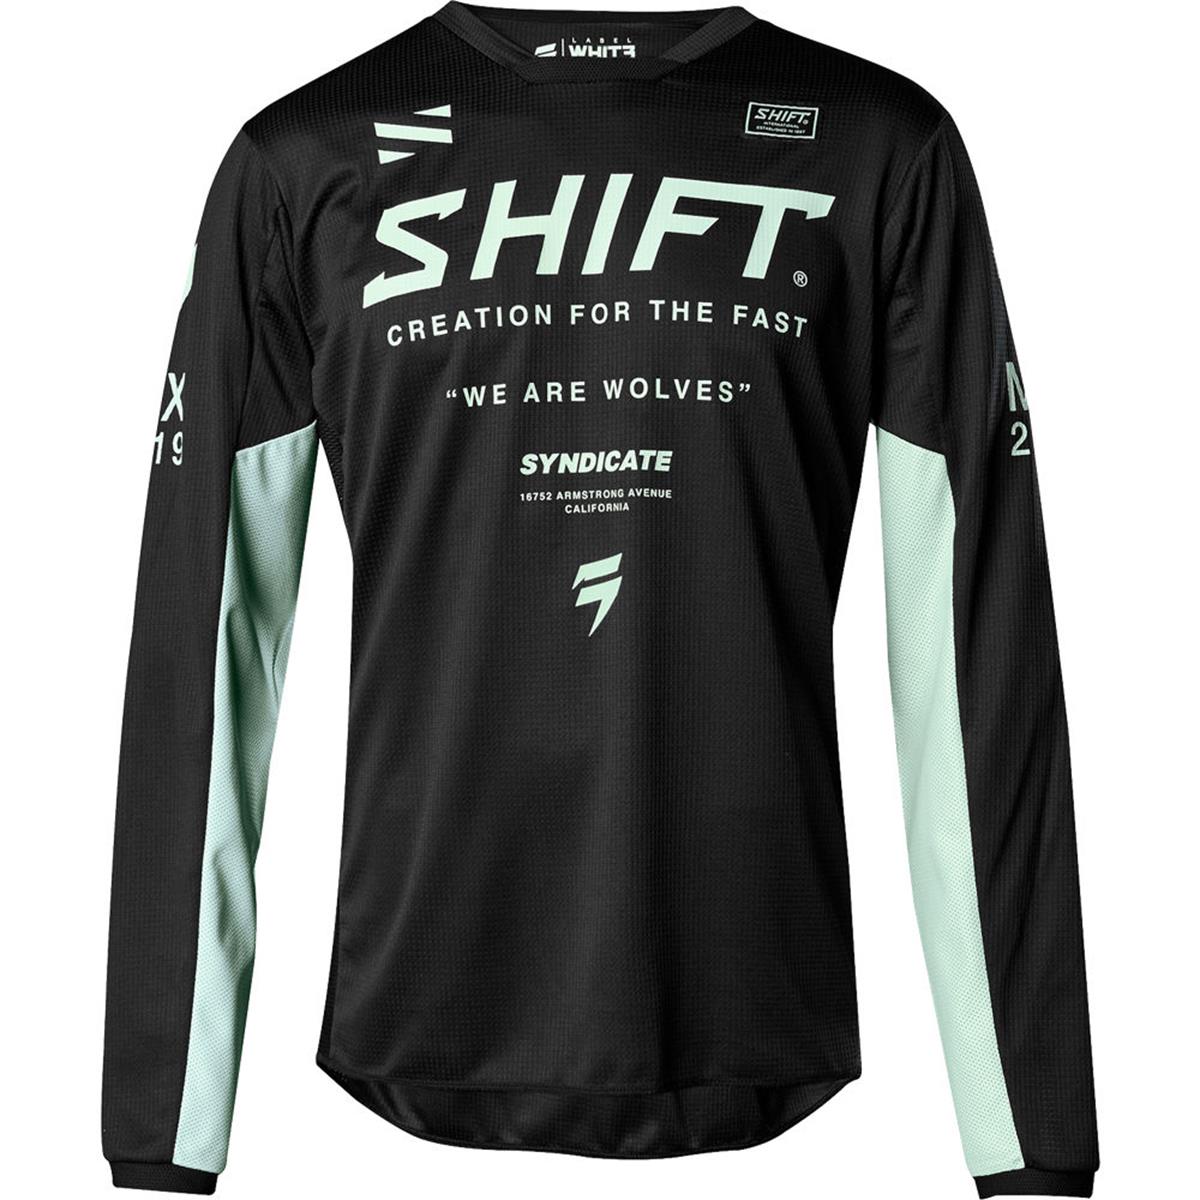 Shift Maglia MX Whit3 Label Iceland Black/Mint - Limited Edition